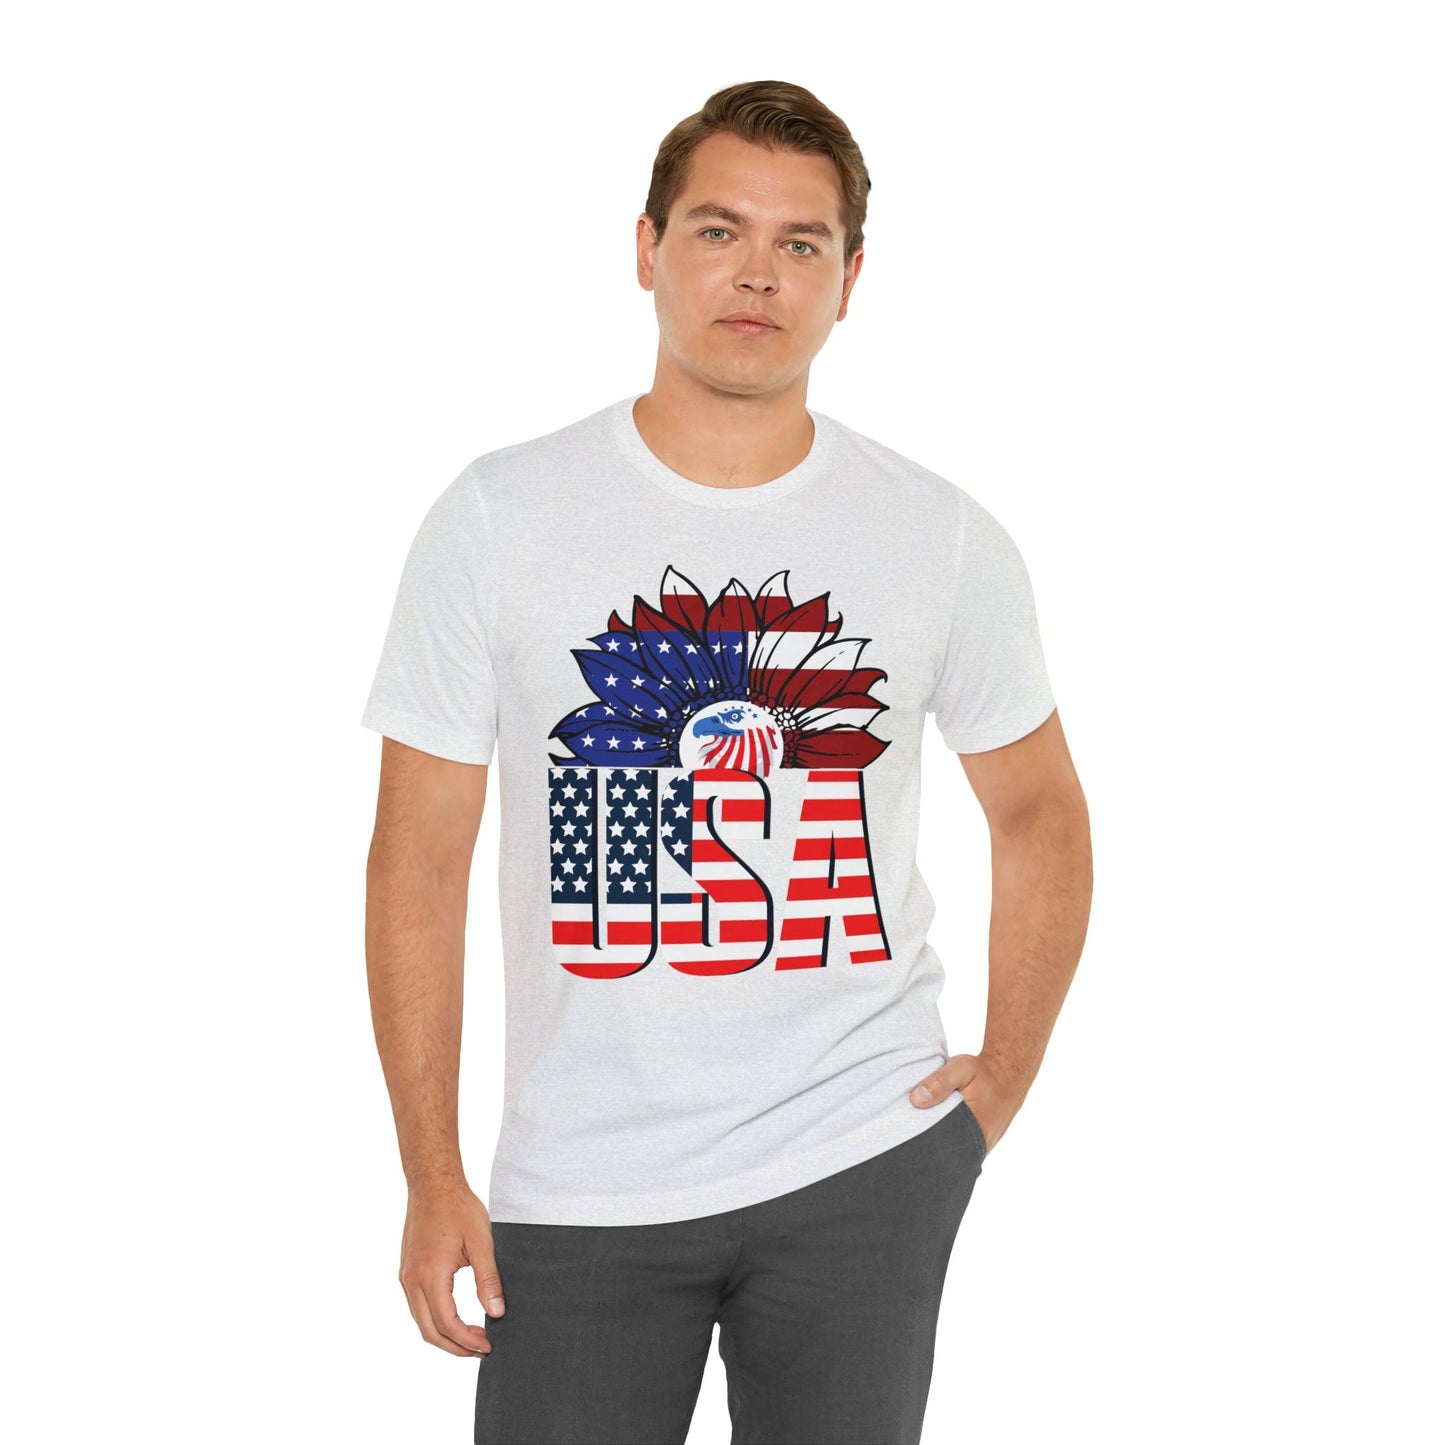 Independence Day shirt, American flag shirt, Red, white, and blue shirt, - Giftsmojo